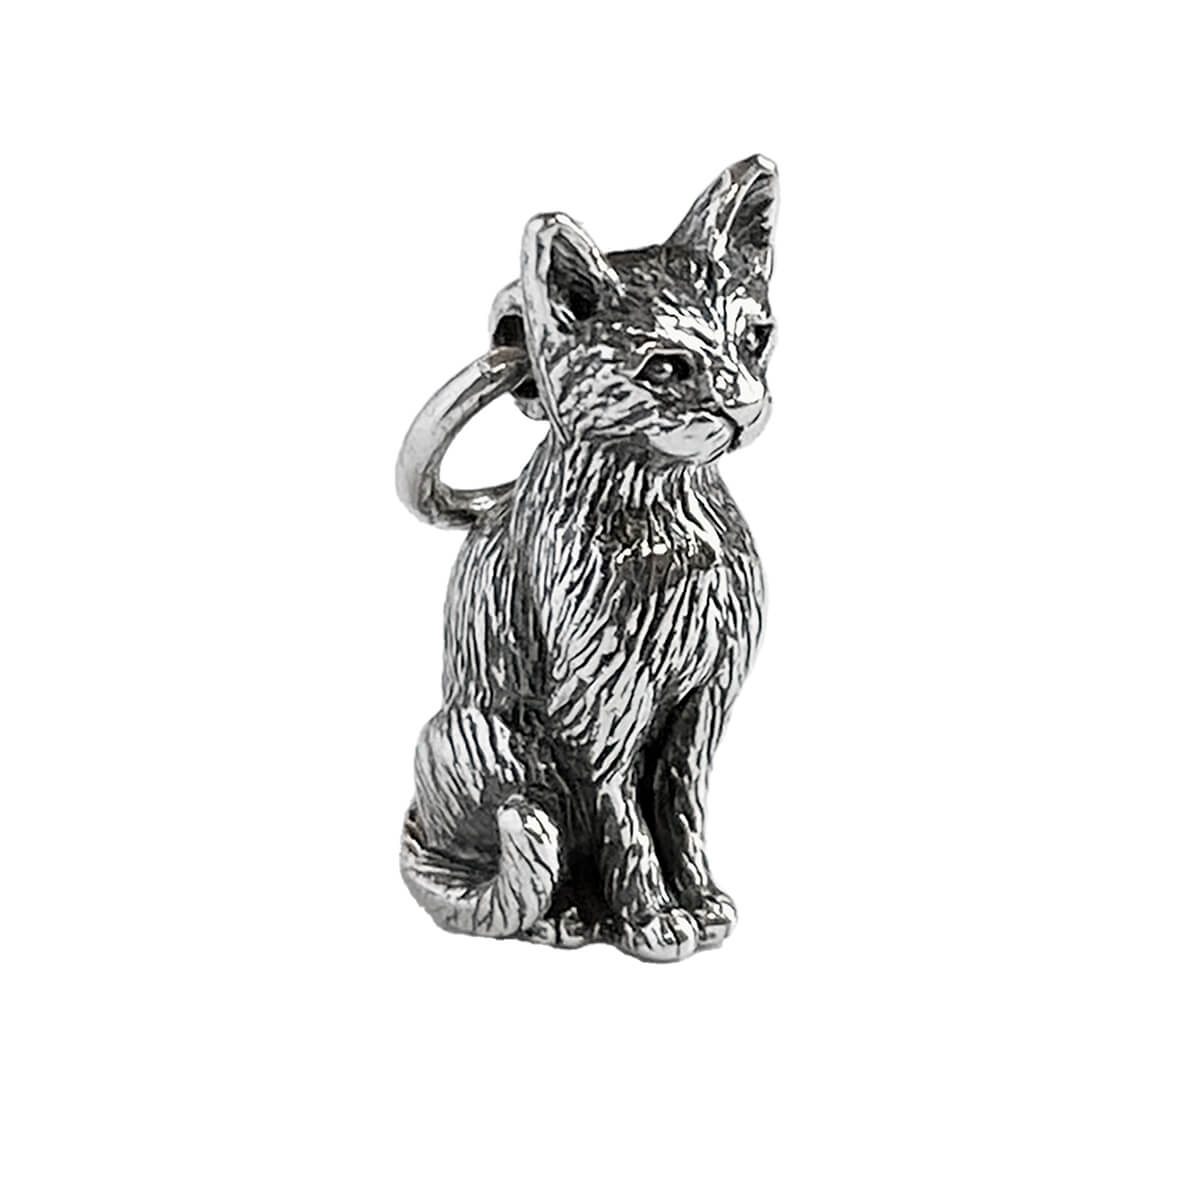 Sterling silver sitting cat charm